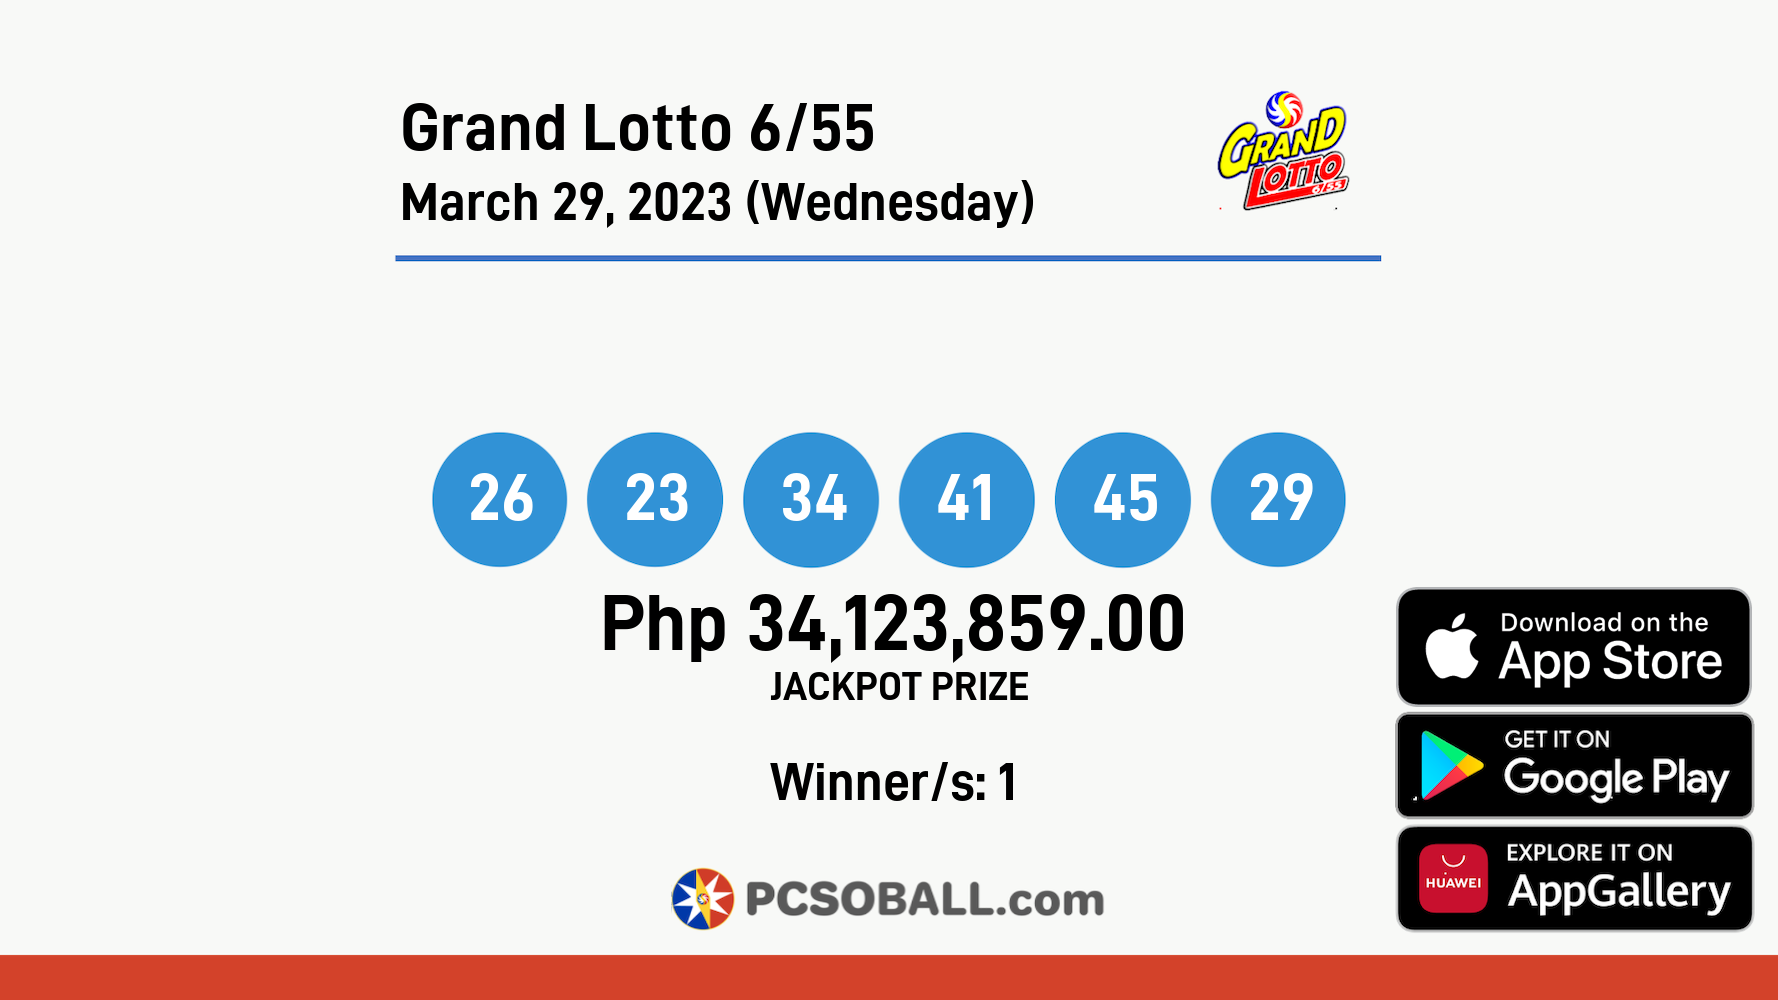 Grand Lotto 6/55 March 29, 2023 (Wednesday) Result